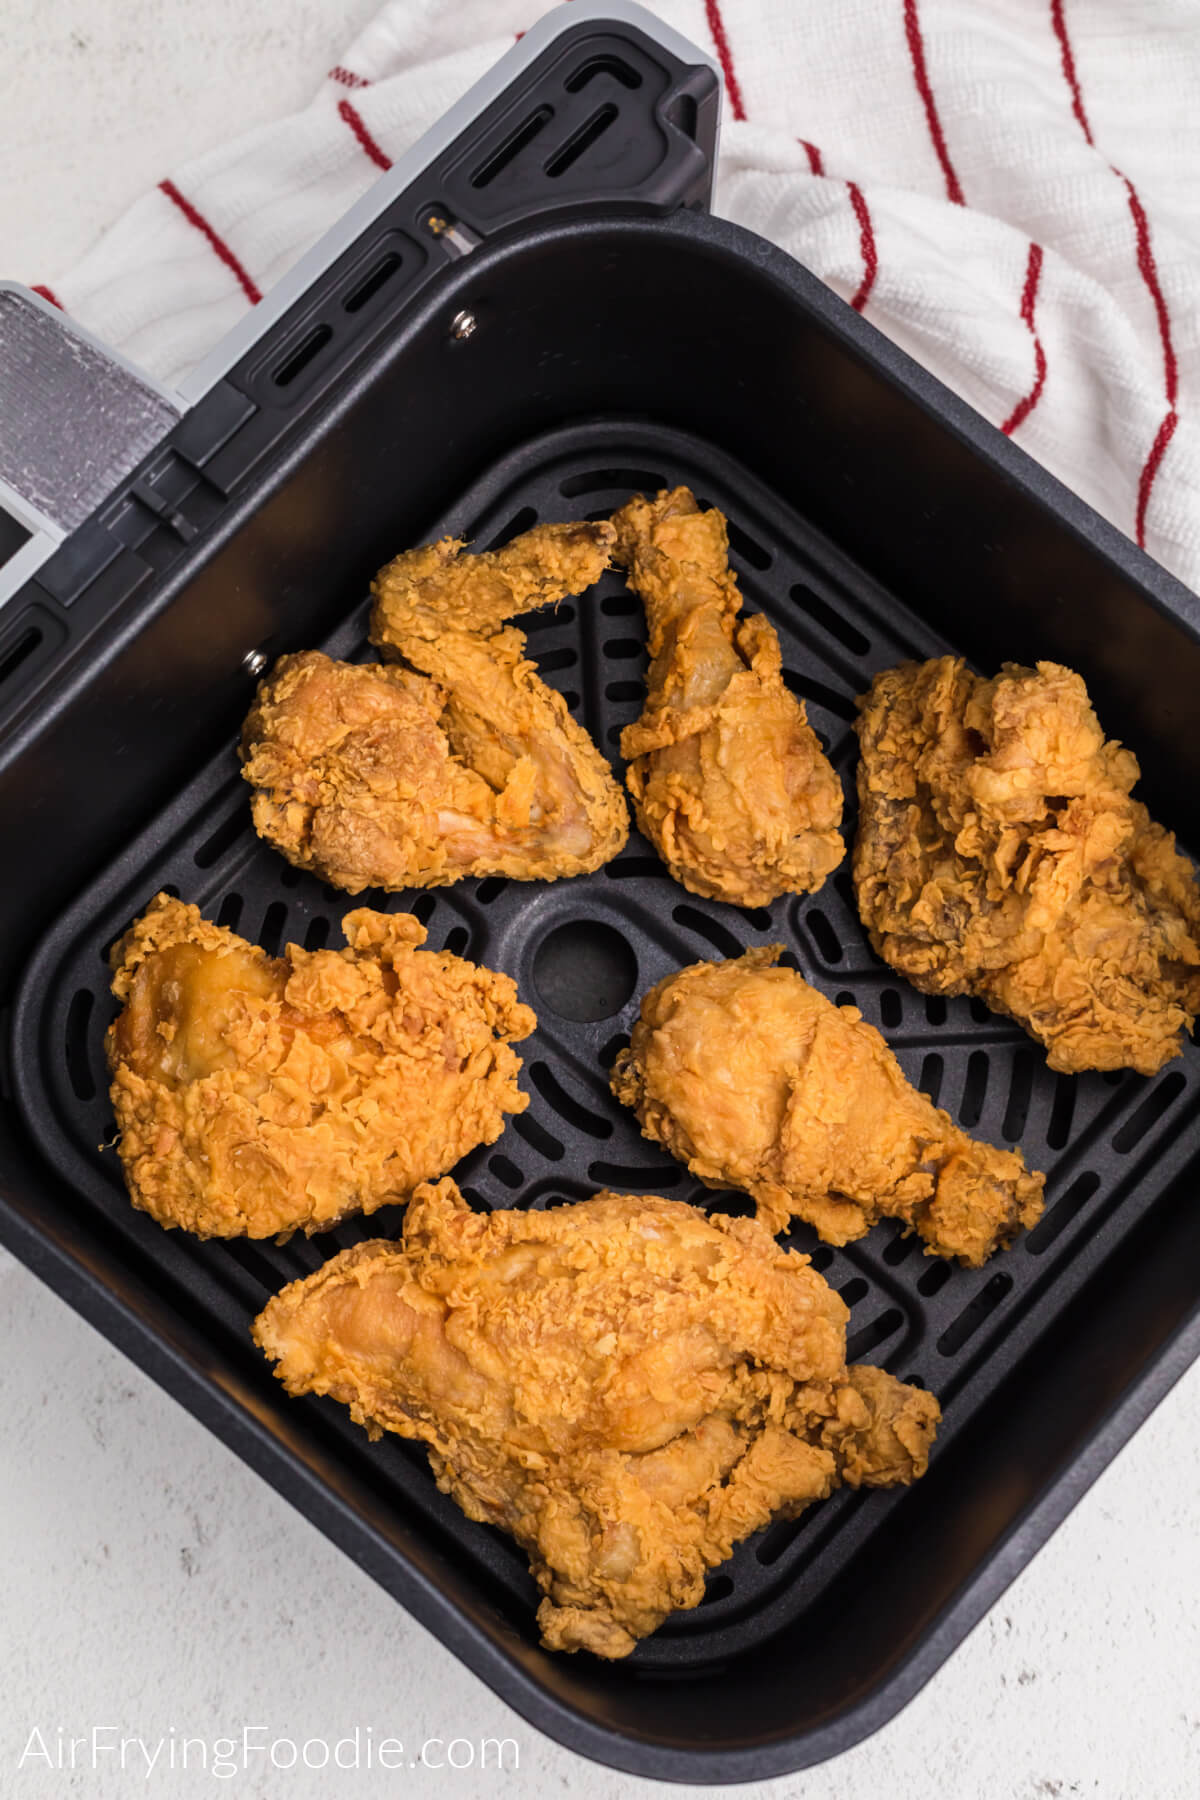 Fried chicken in air fryer basket, spaced apart evenly for air circulation and even cooking. 